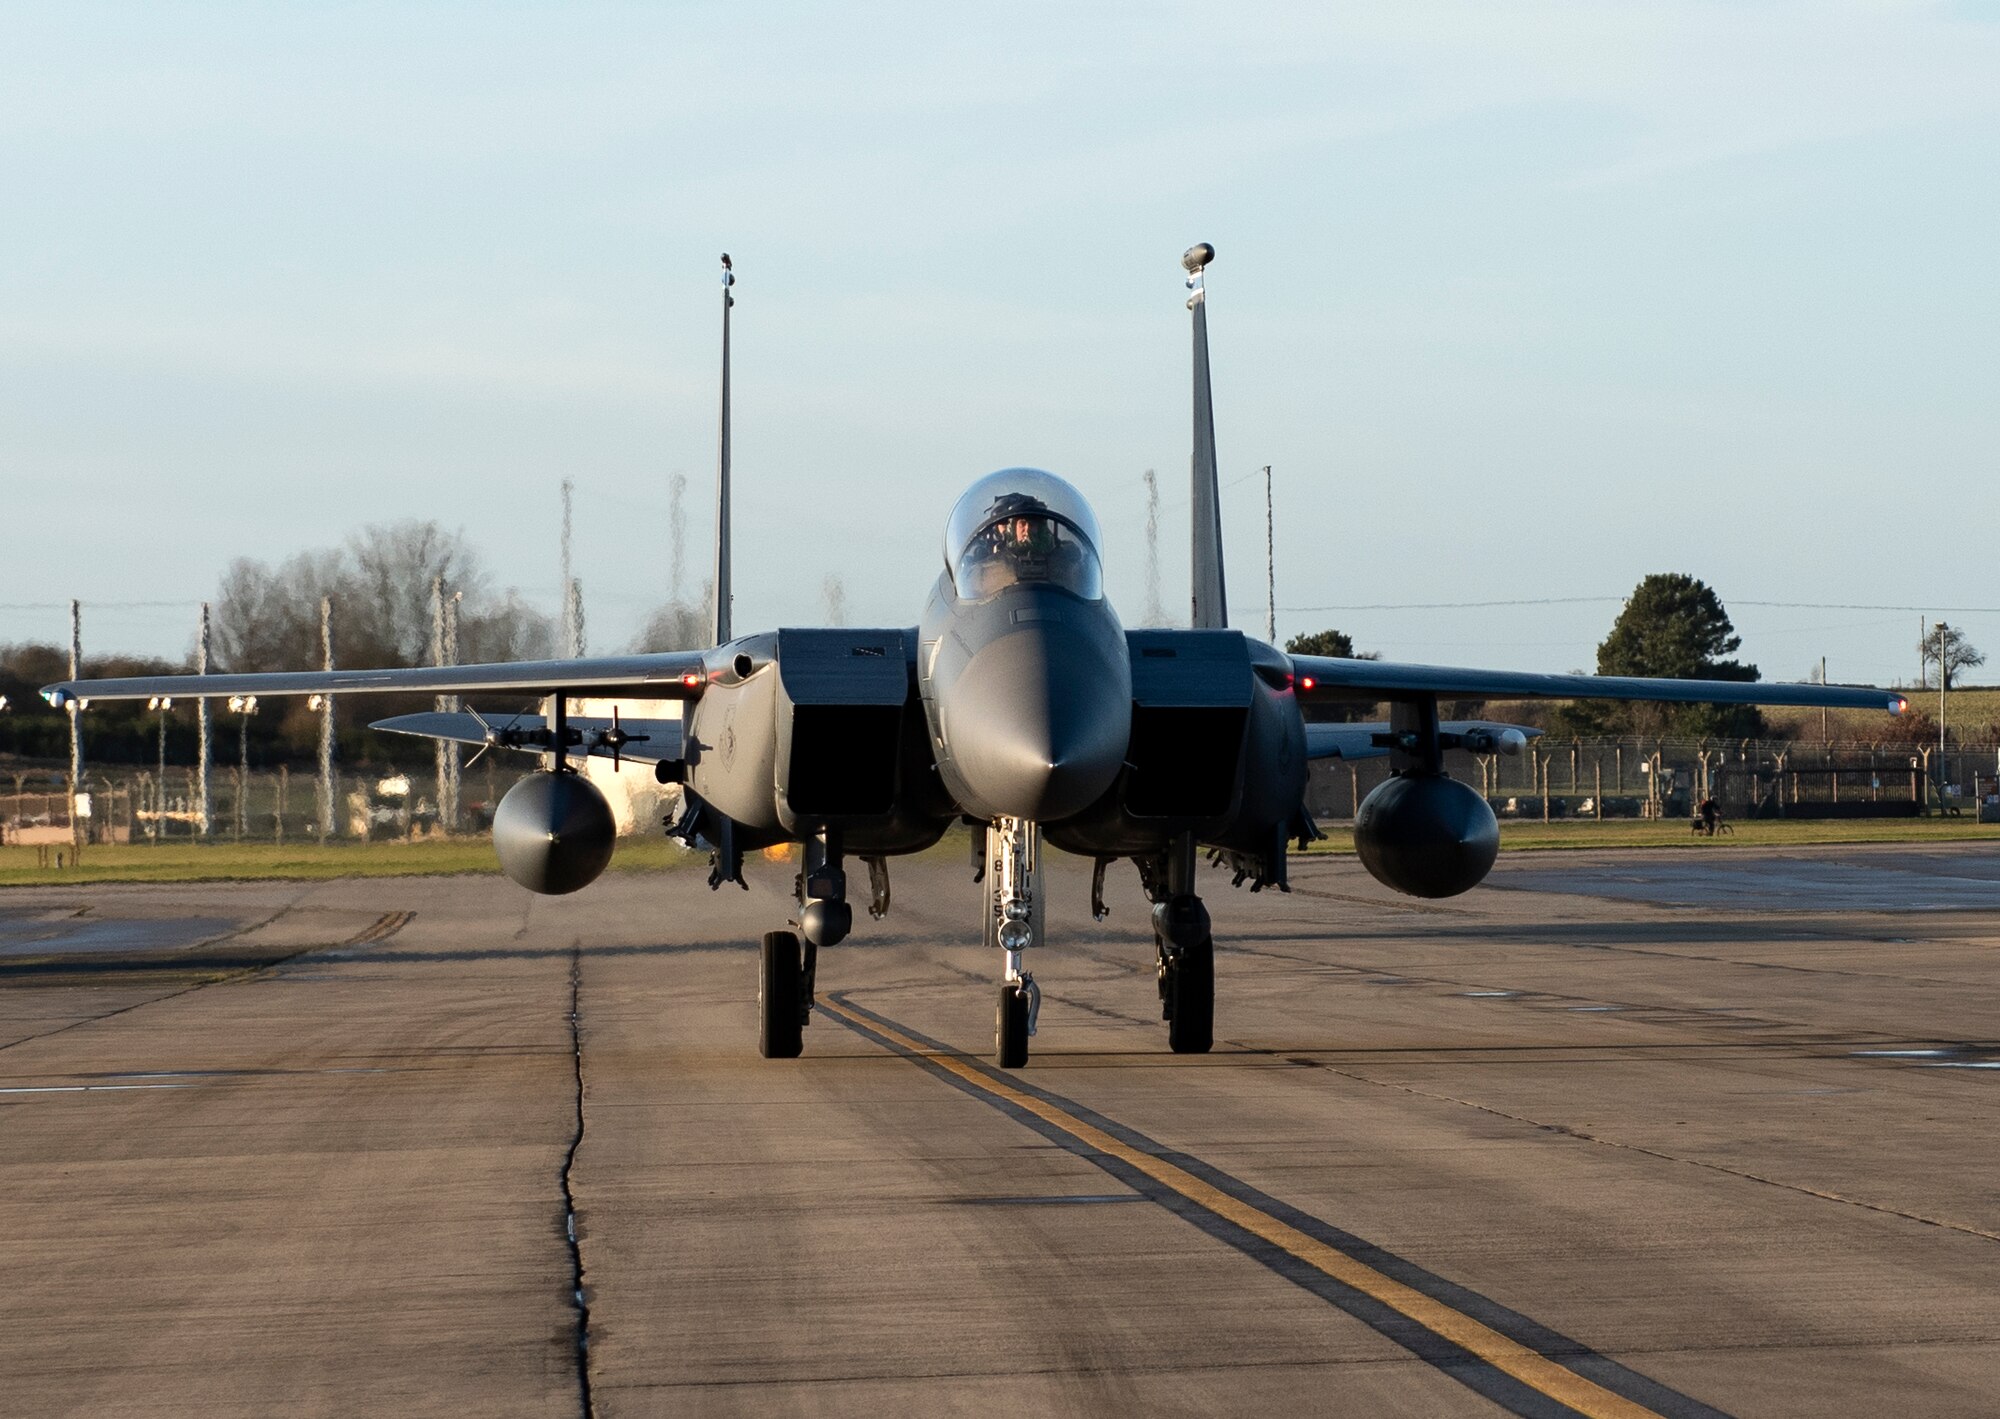 An F-15E Strike Eagle assigned to the 492nd Fighter Squadron returns from a sortie during Agile Combat Employment training at Royal Air Force Lakenheath, England, Jan. 12, 2021. Training incorporating ACE concepts contribute to the development of multi-capable Airmen and aircrew, improving interoperability and helping allies and partners increase their capabilities in less than optimal environments. (U.S. Air Force photo by Airman 1st Class Jessi Monte)